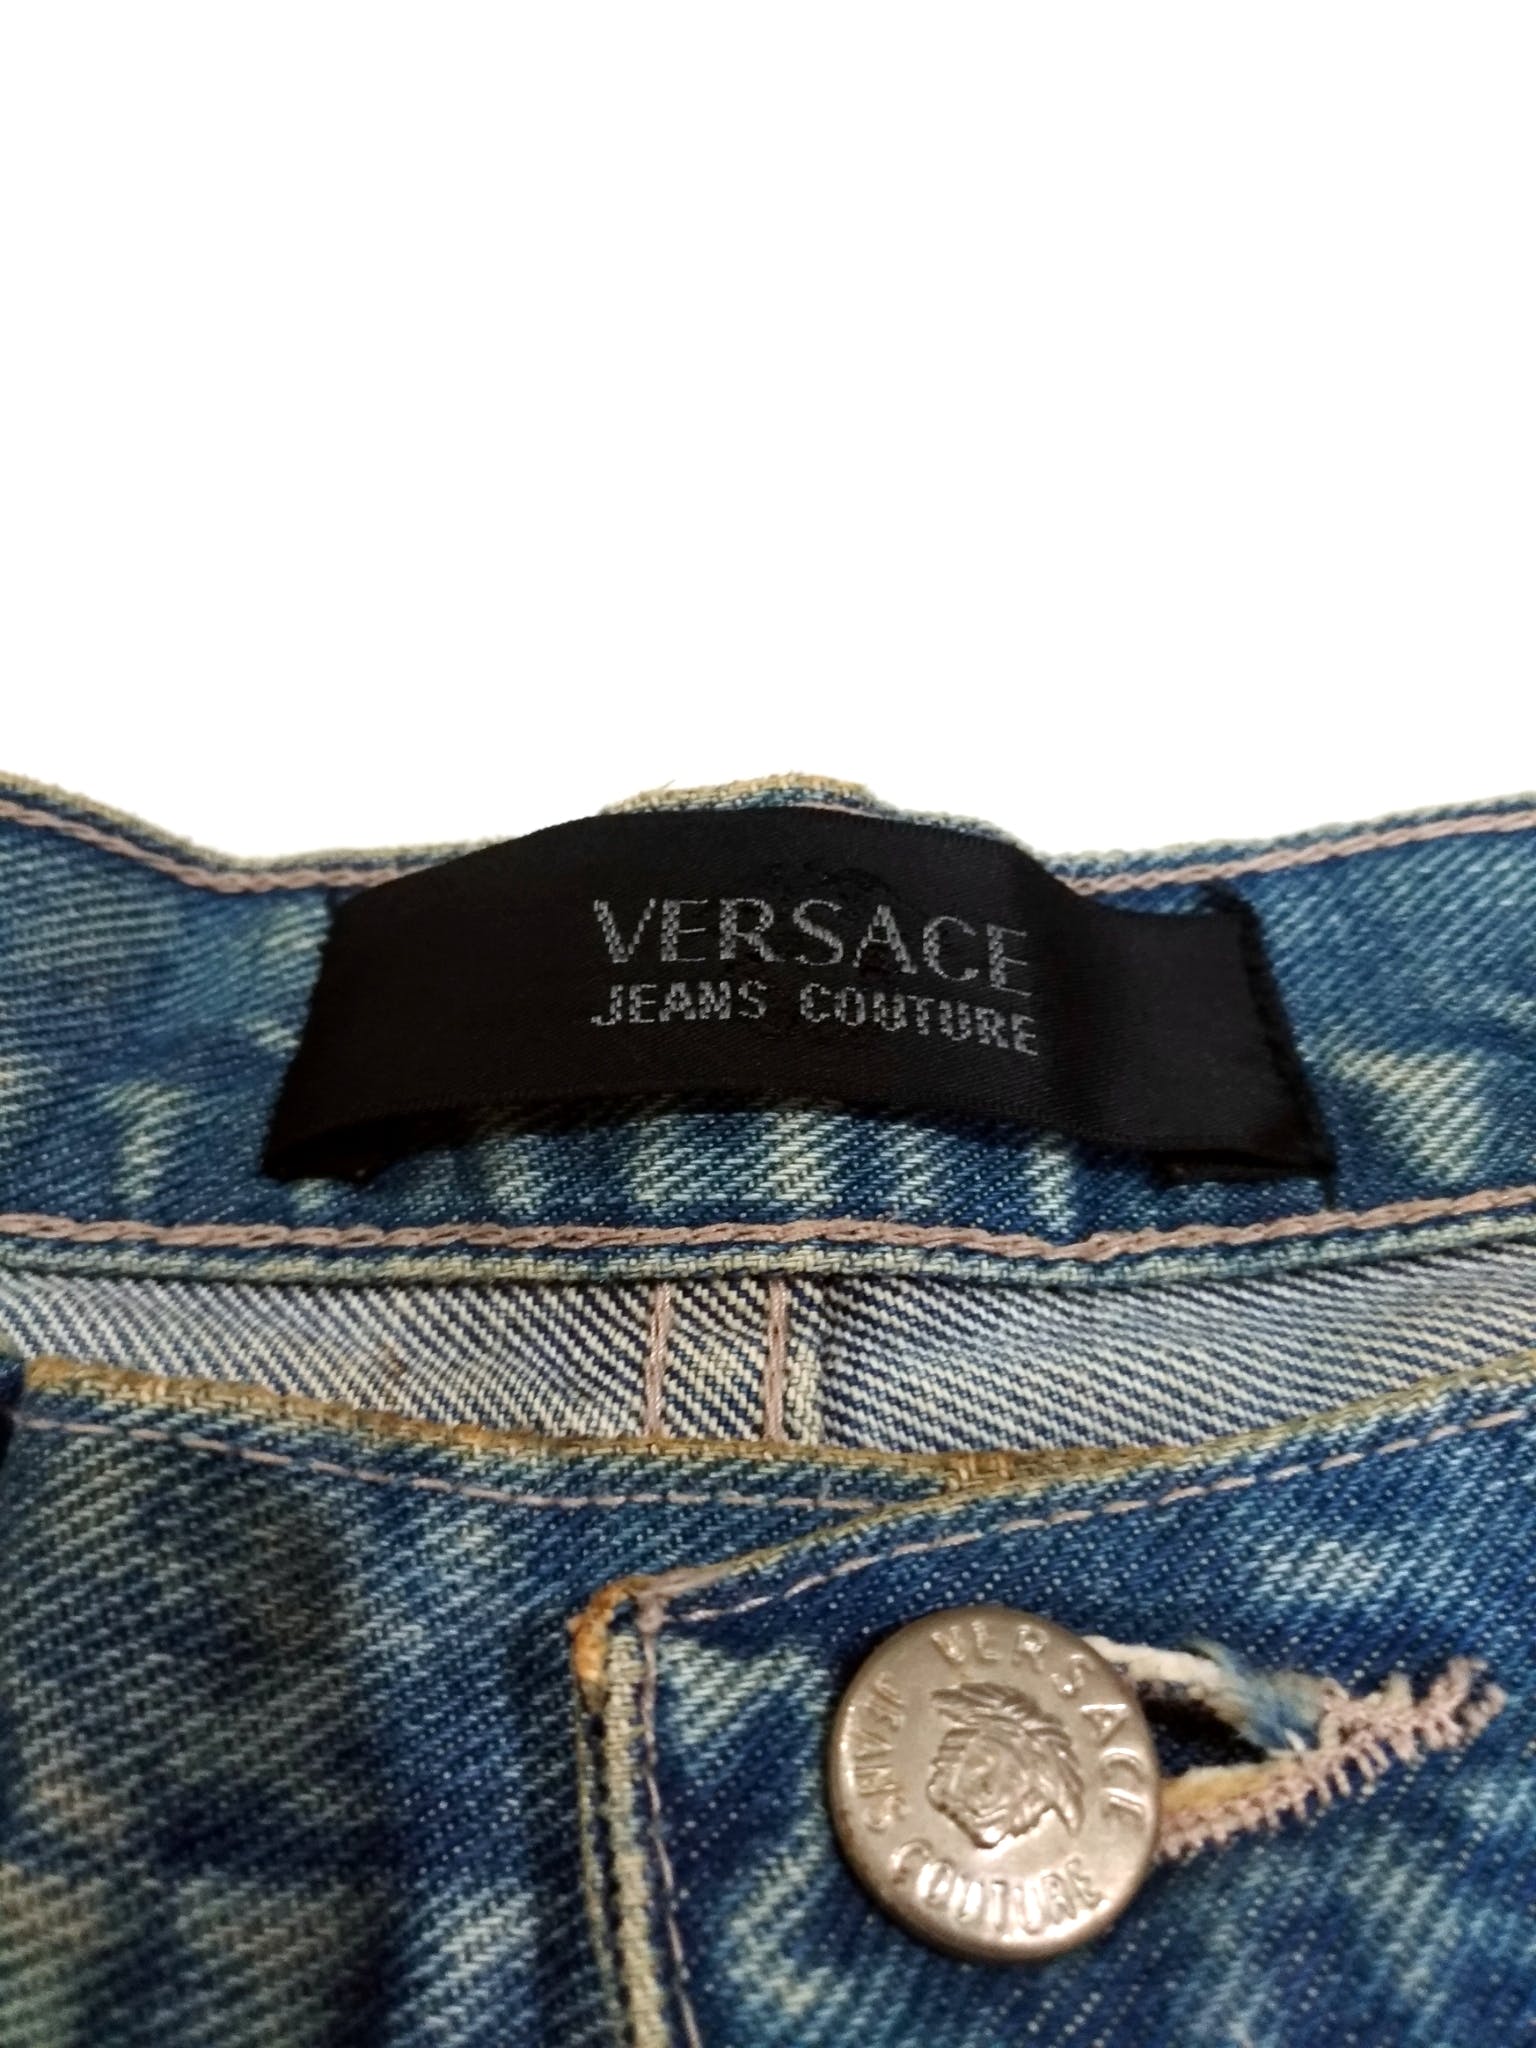 RARE!VTG 90s VERSACE JEANS COUTURE MADE IN ITALY BLUE DENIM - 6